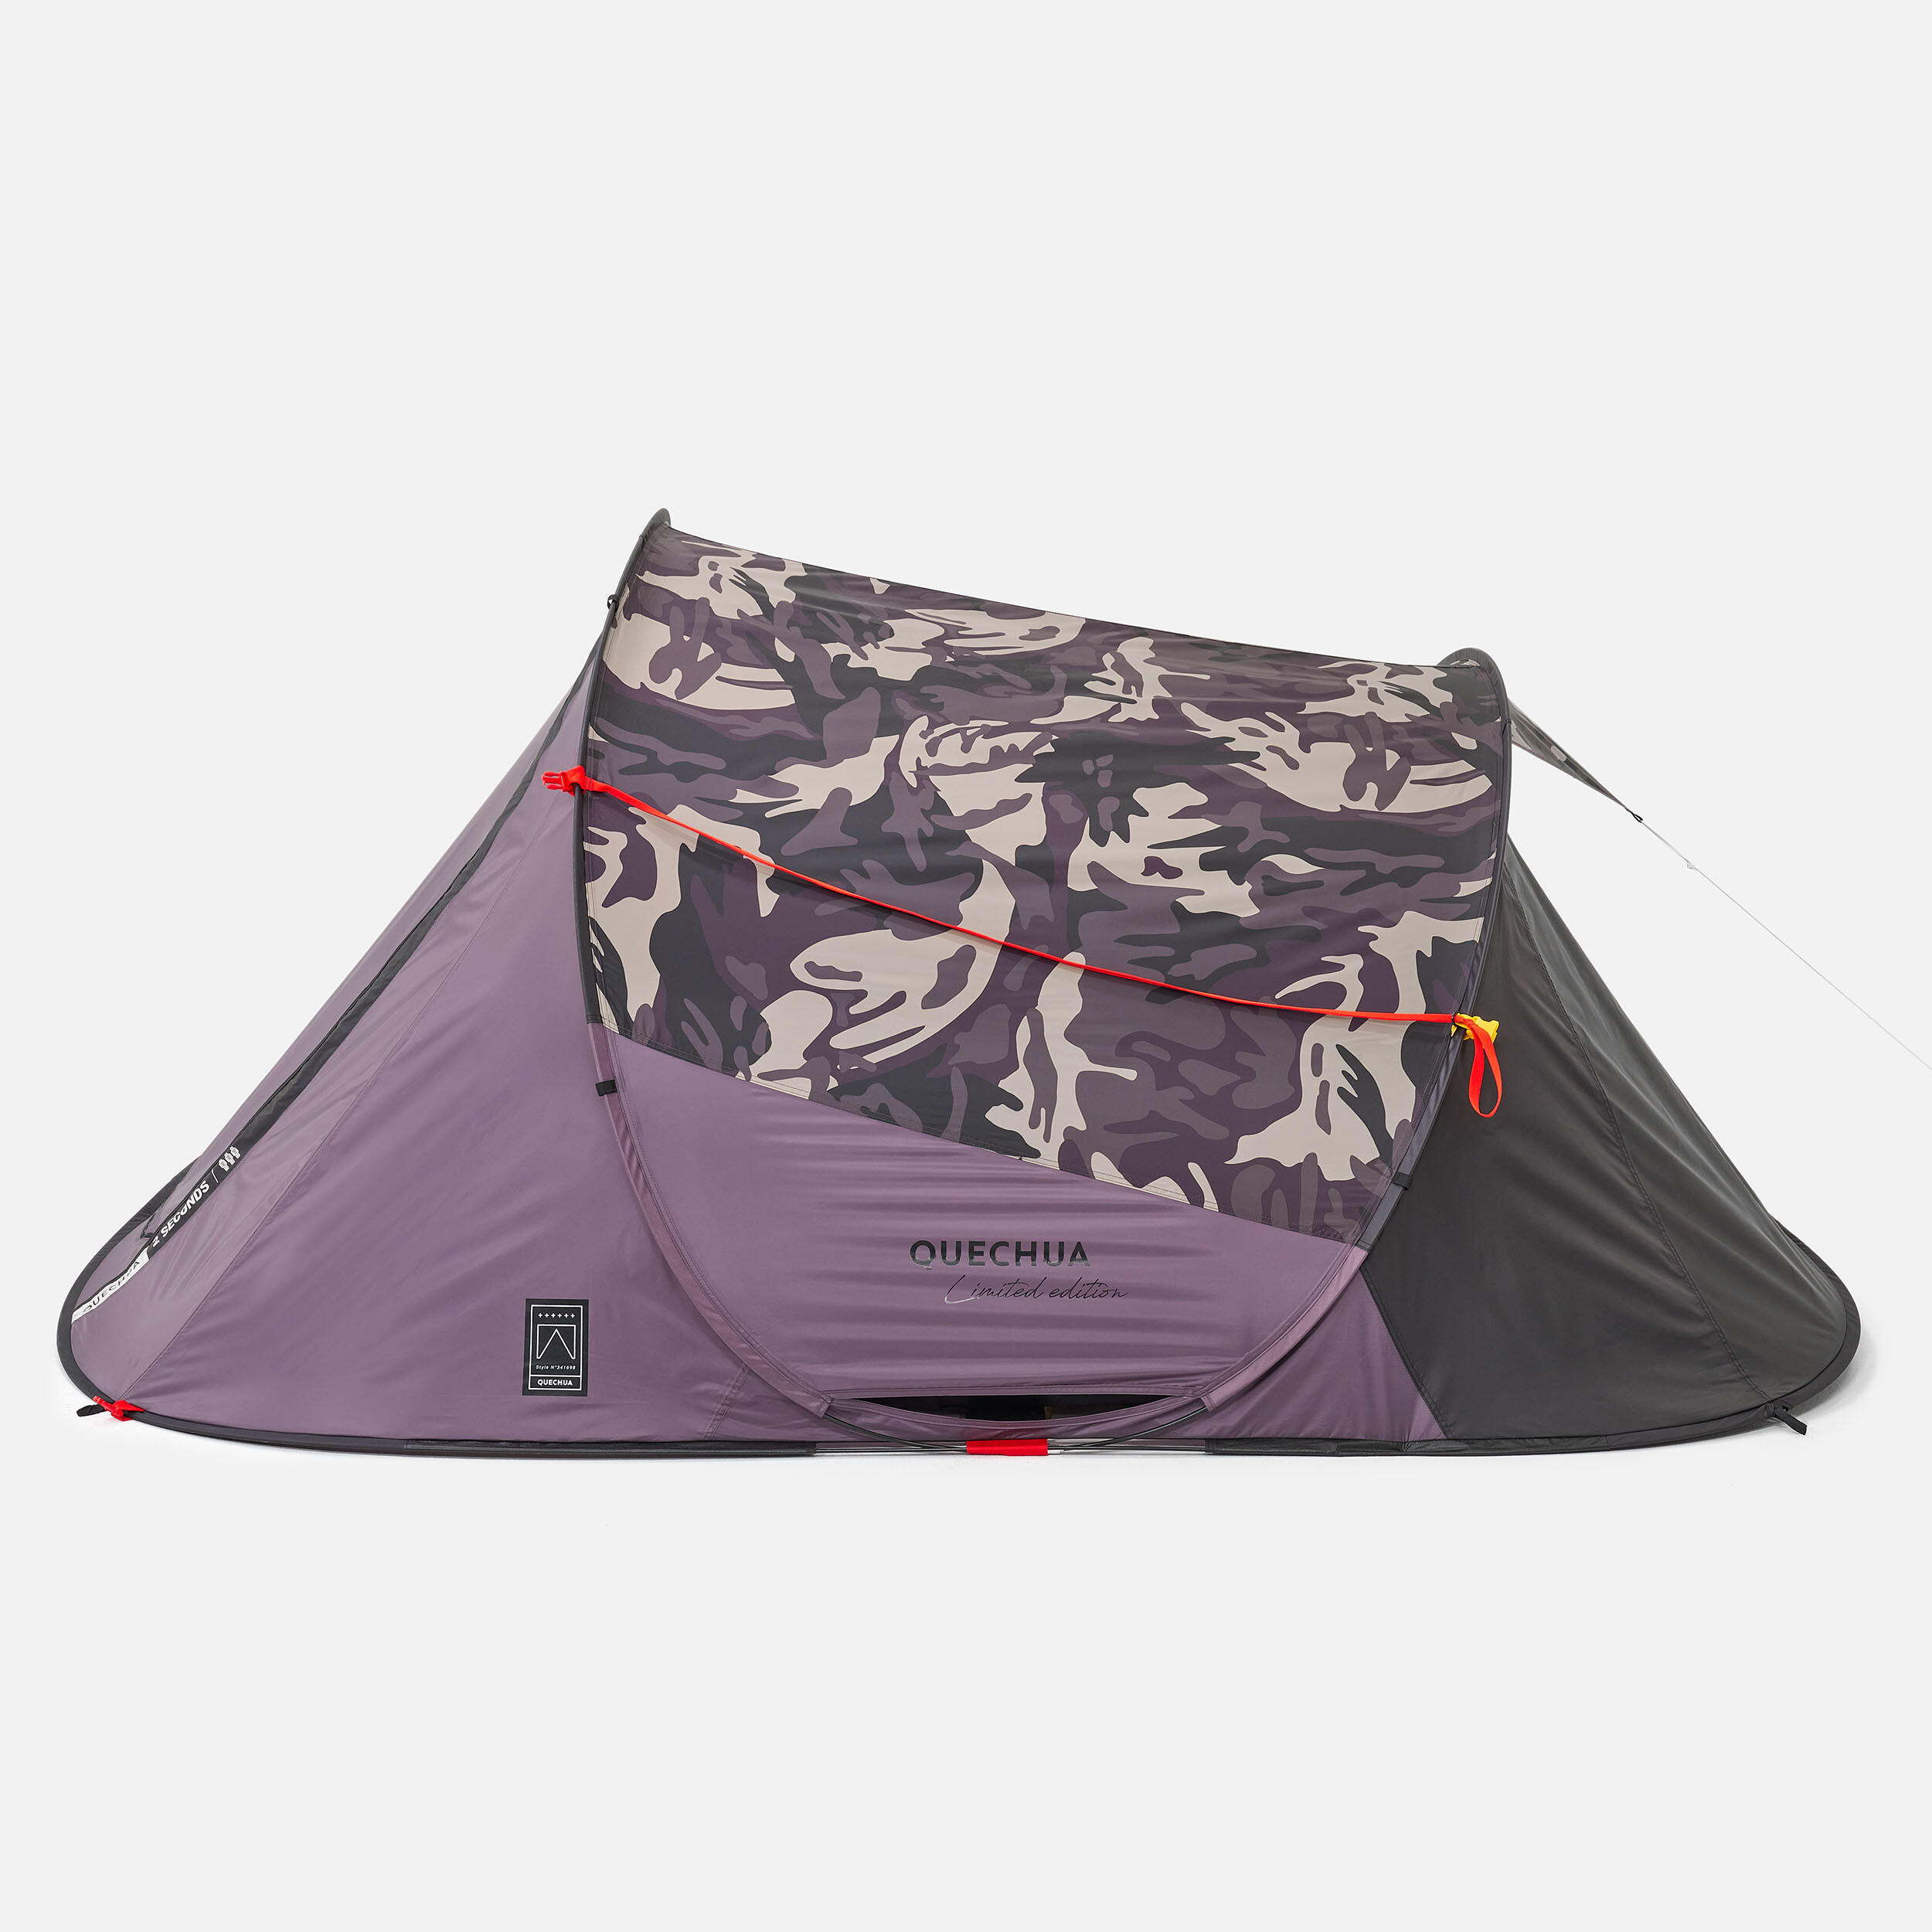 Camping tent - 2 SECONDS - 3-person 6/10